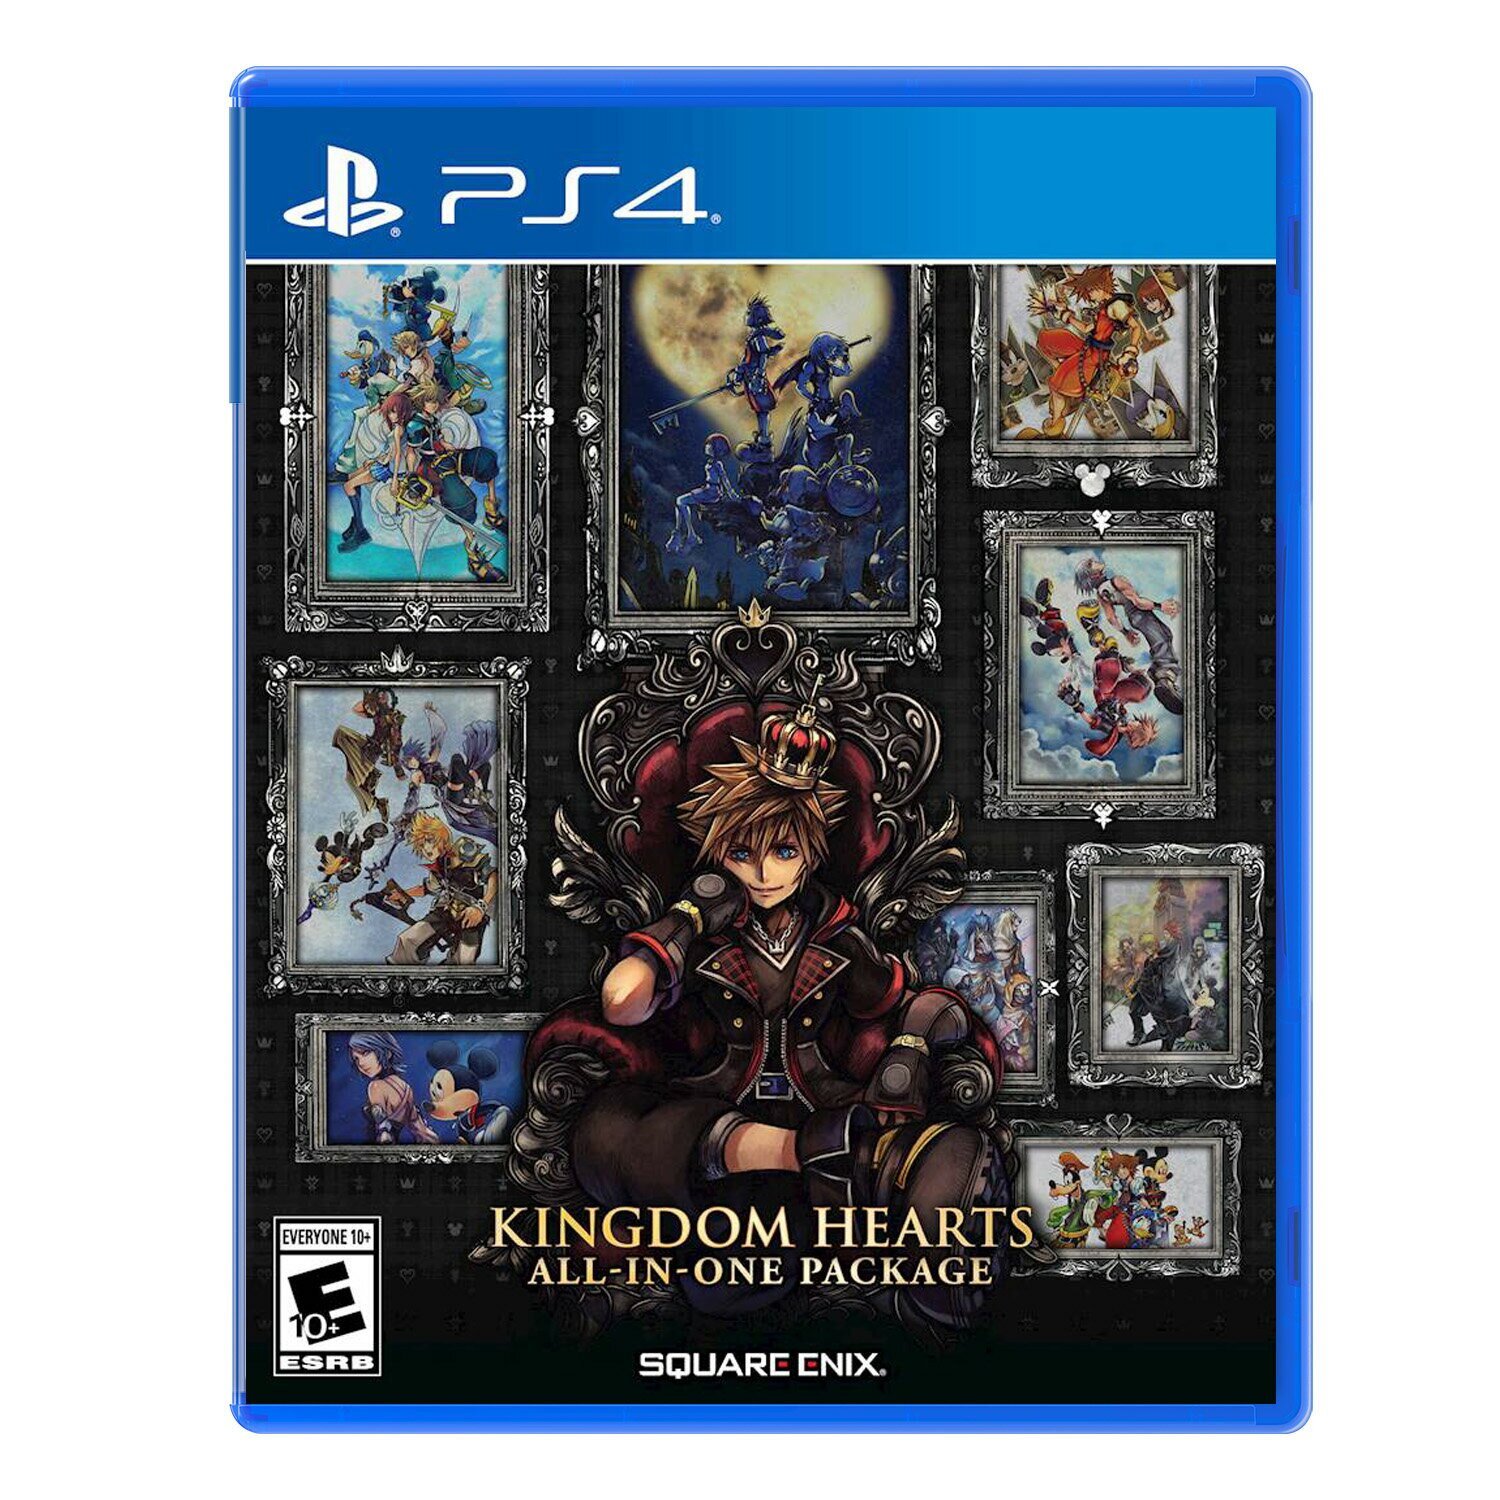 Kingdom Hearts All-In-One Package (Import), Square Enix